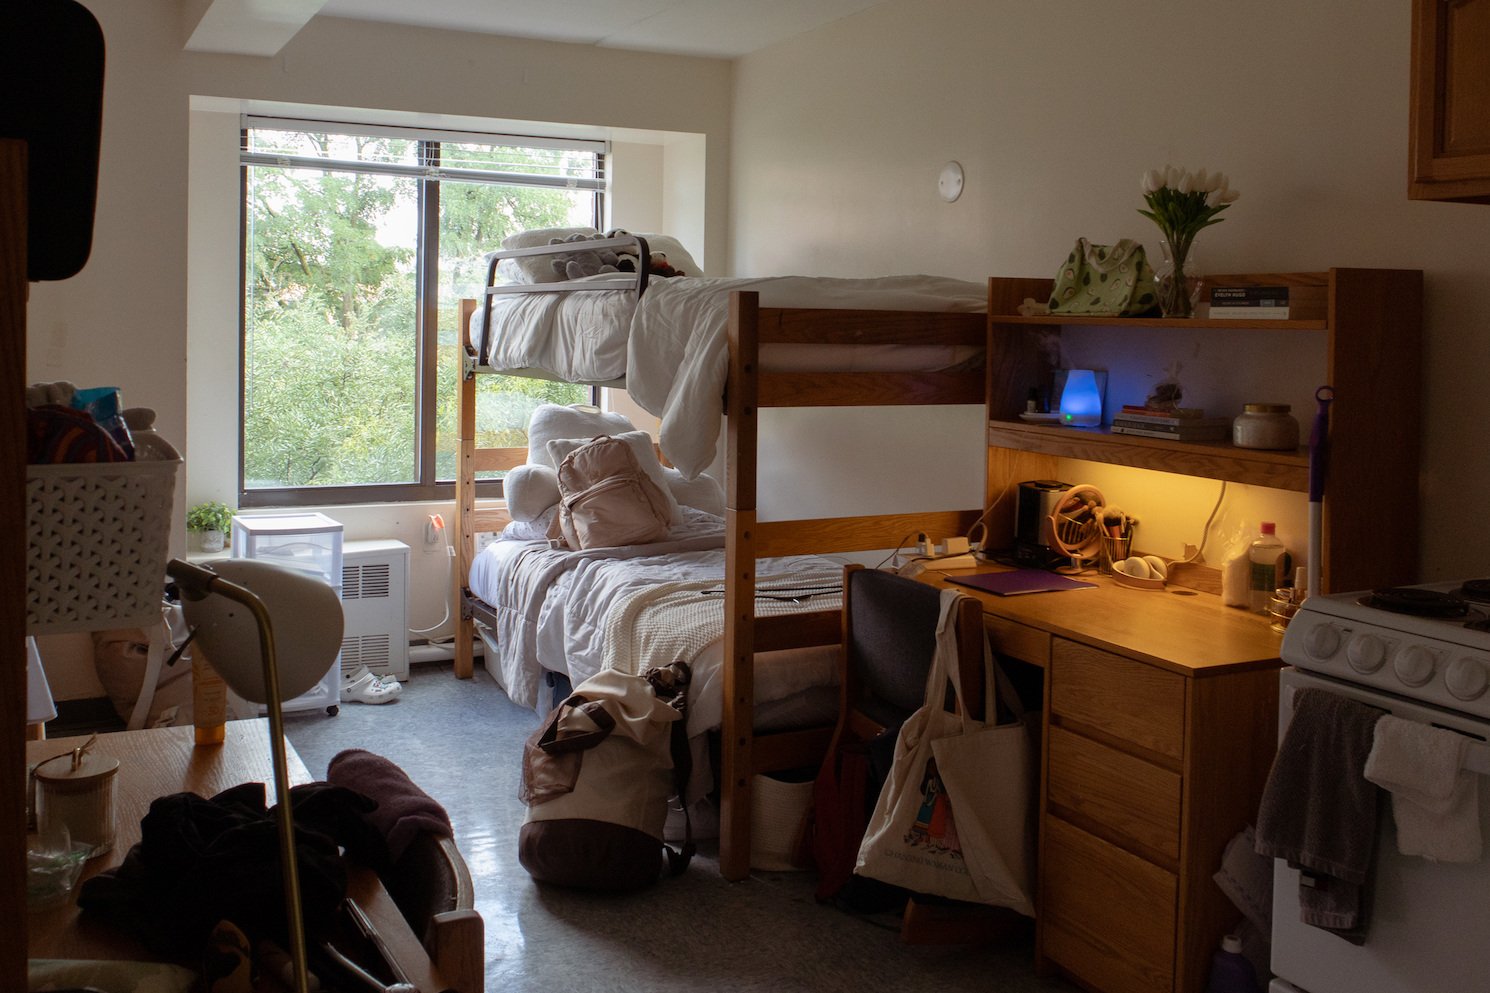 A dorm room bunk bed with white sheets next to a wooden desk. In the background, a window.